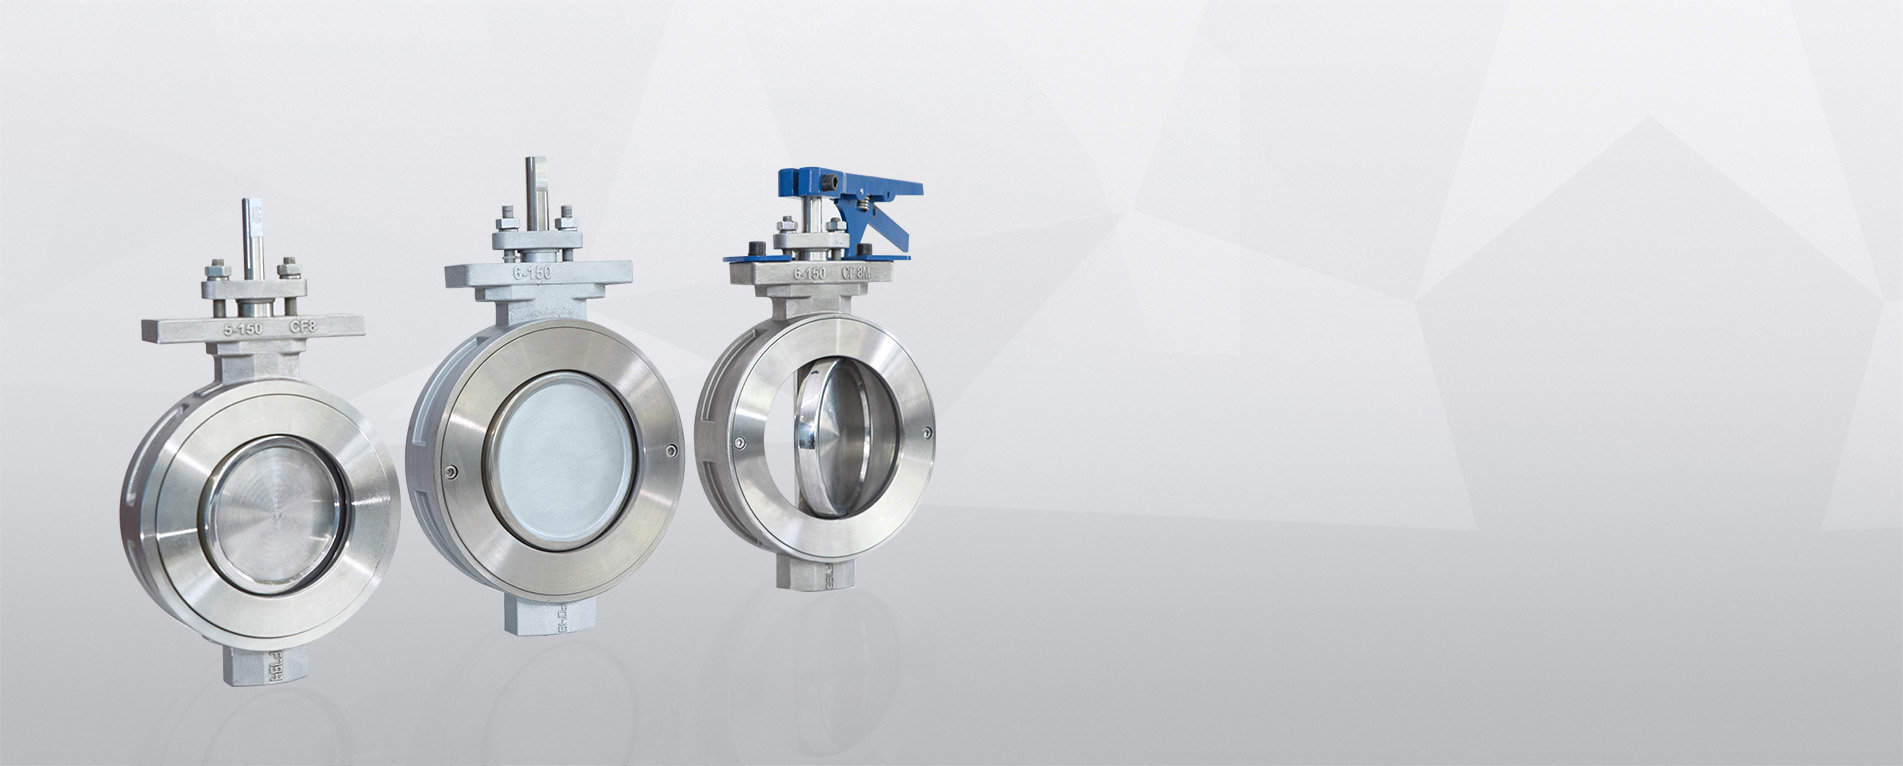 EXTREMELY DURABLE HIGH PERFORMANCE BUTTERFLY VALVE